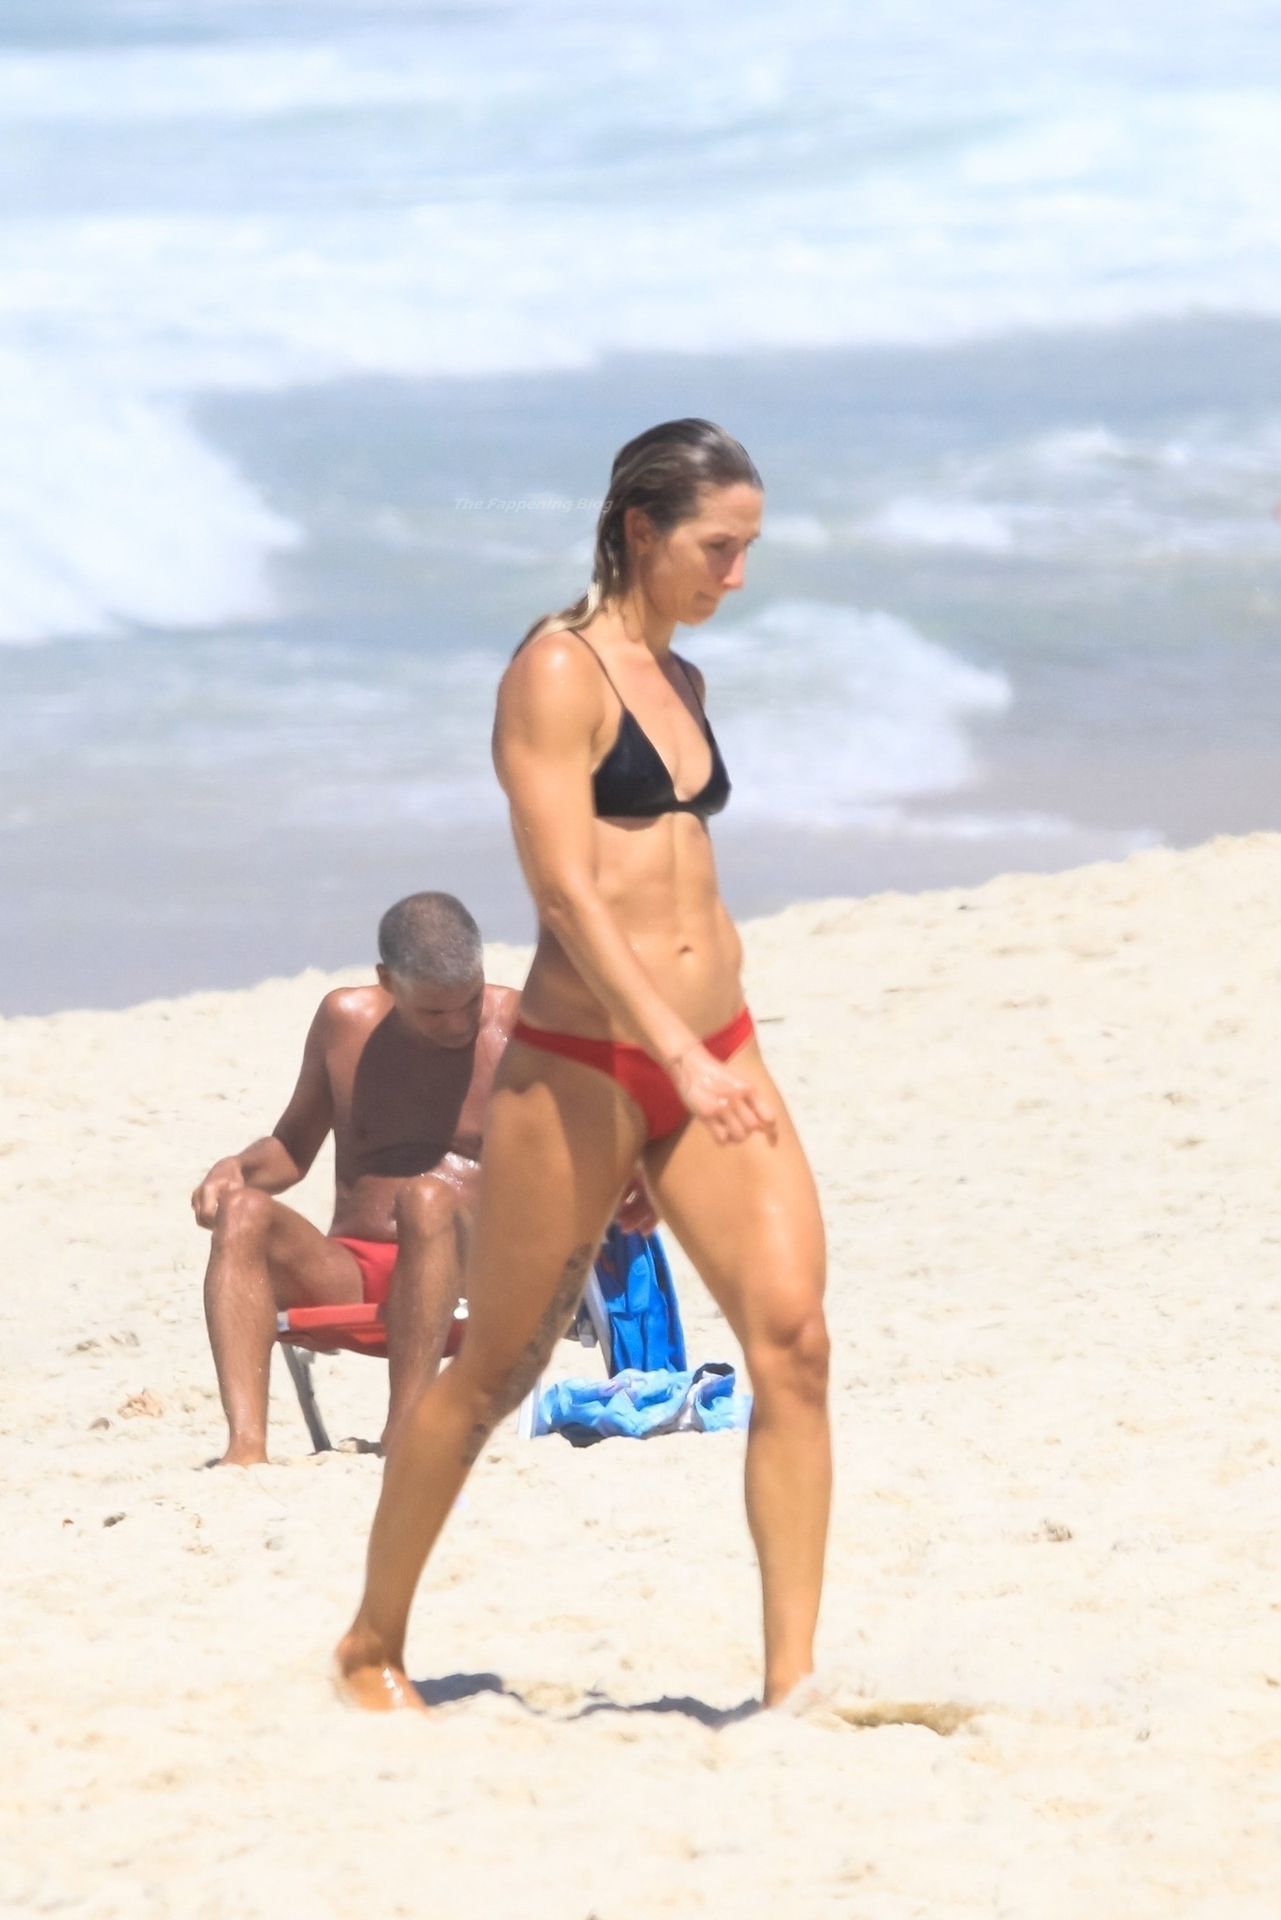 Brandie Wilkerson & Heather Bansley Are Seen on the Beach in Rio (108 Photos)